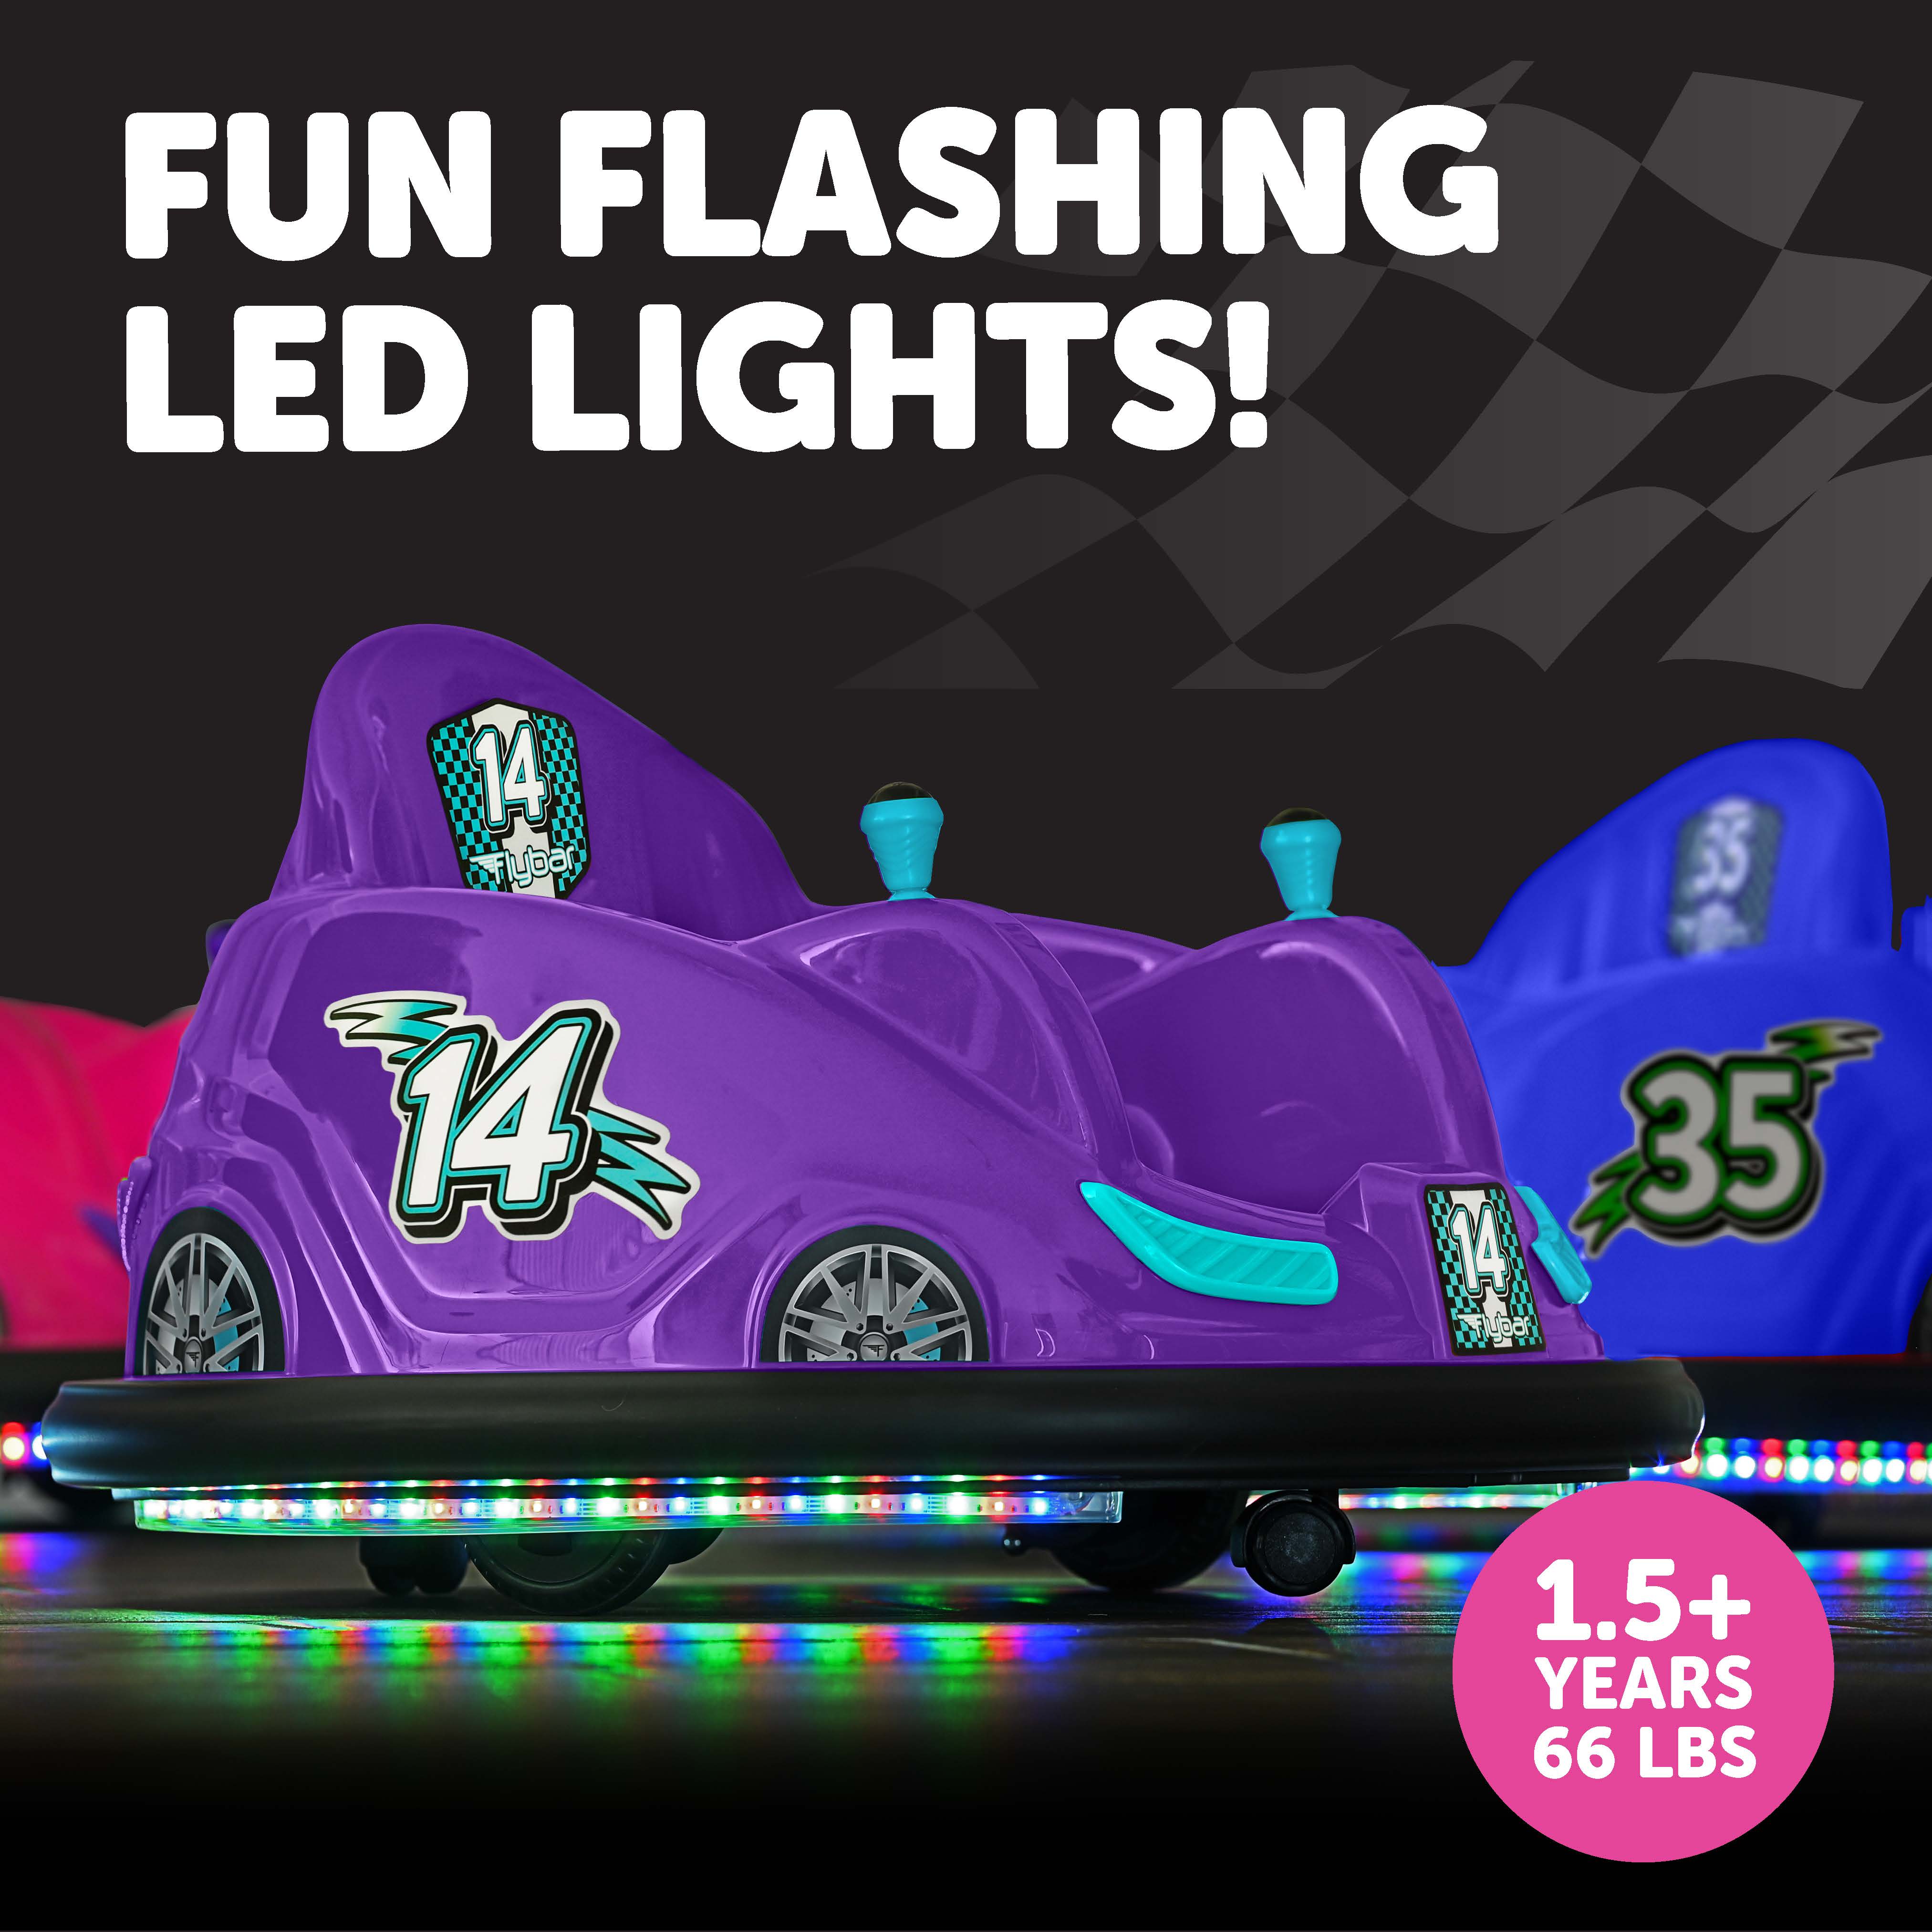 Flybar 6V Bumper Car, Battery Powered Ride On, Fun LED Lights, Includes Charger, Purple - image 4 of 9